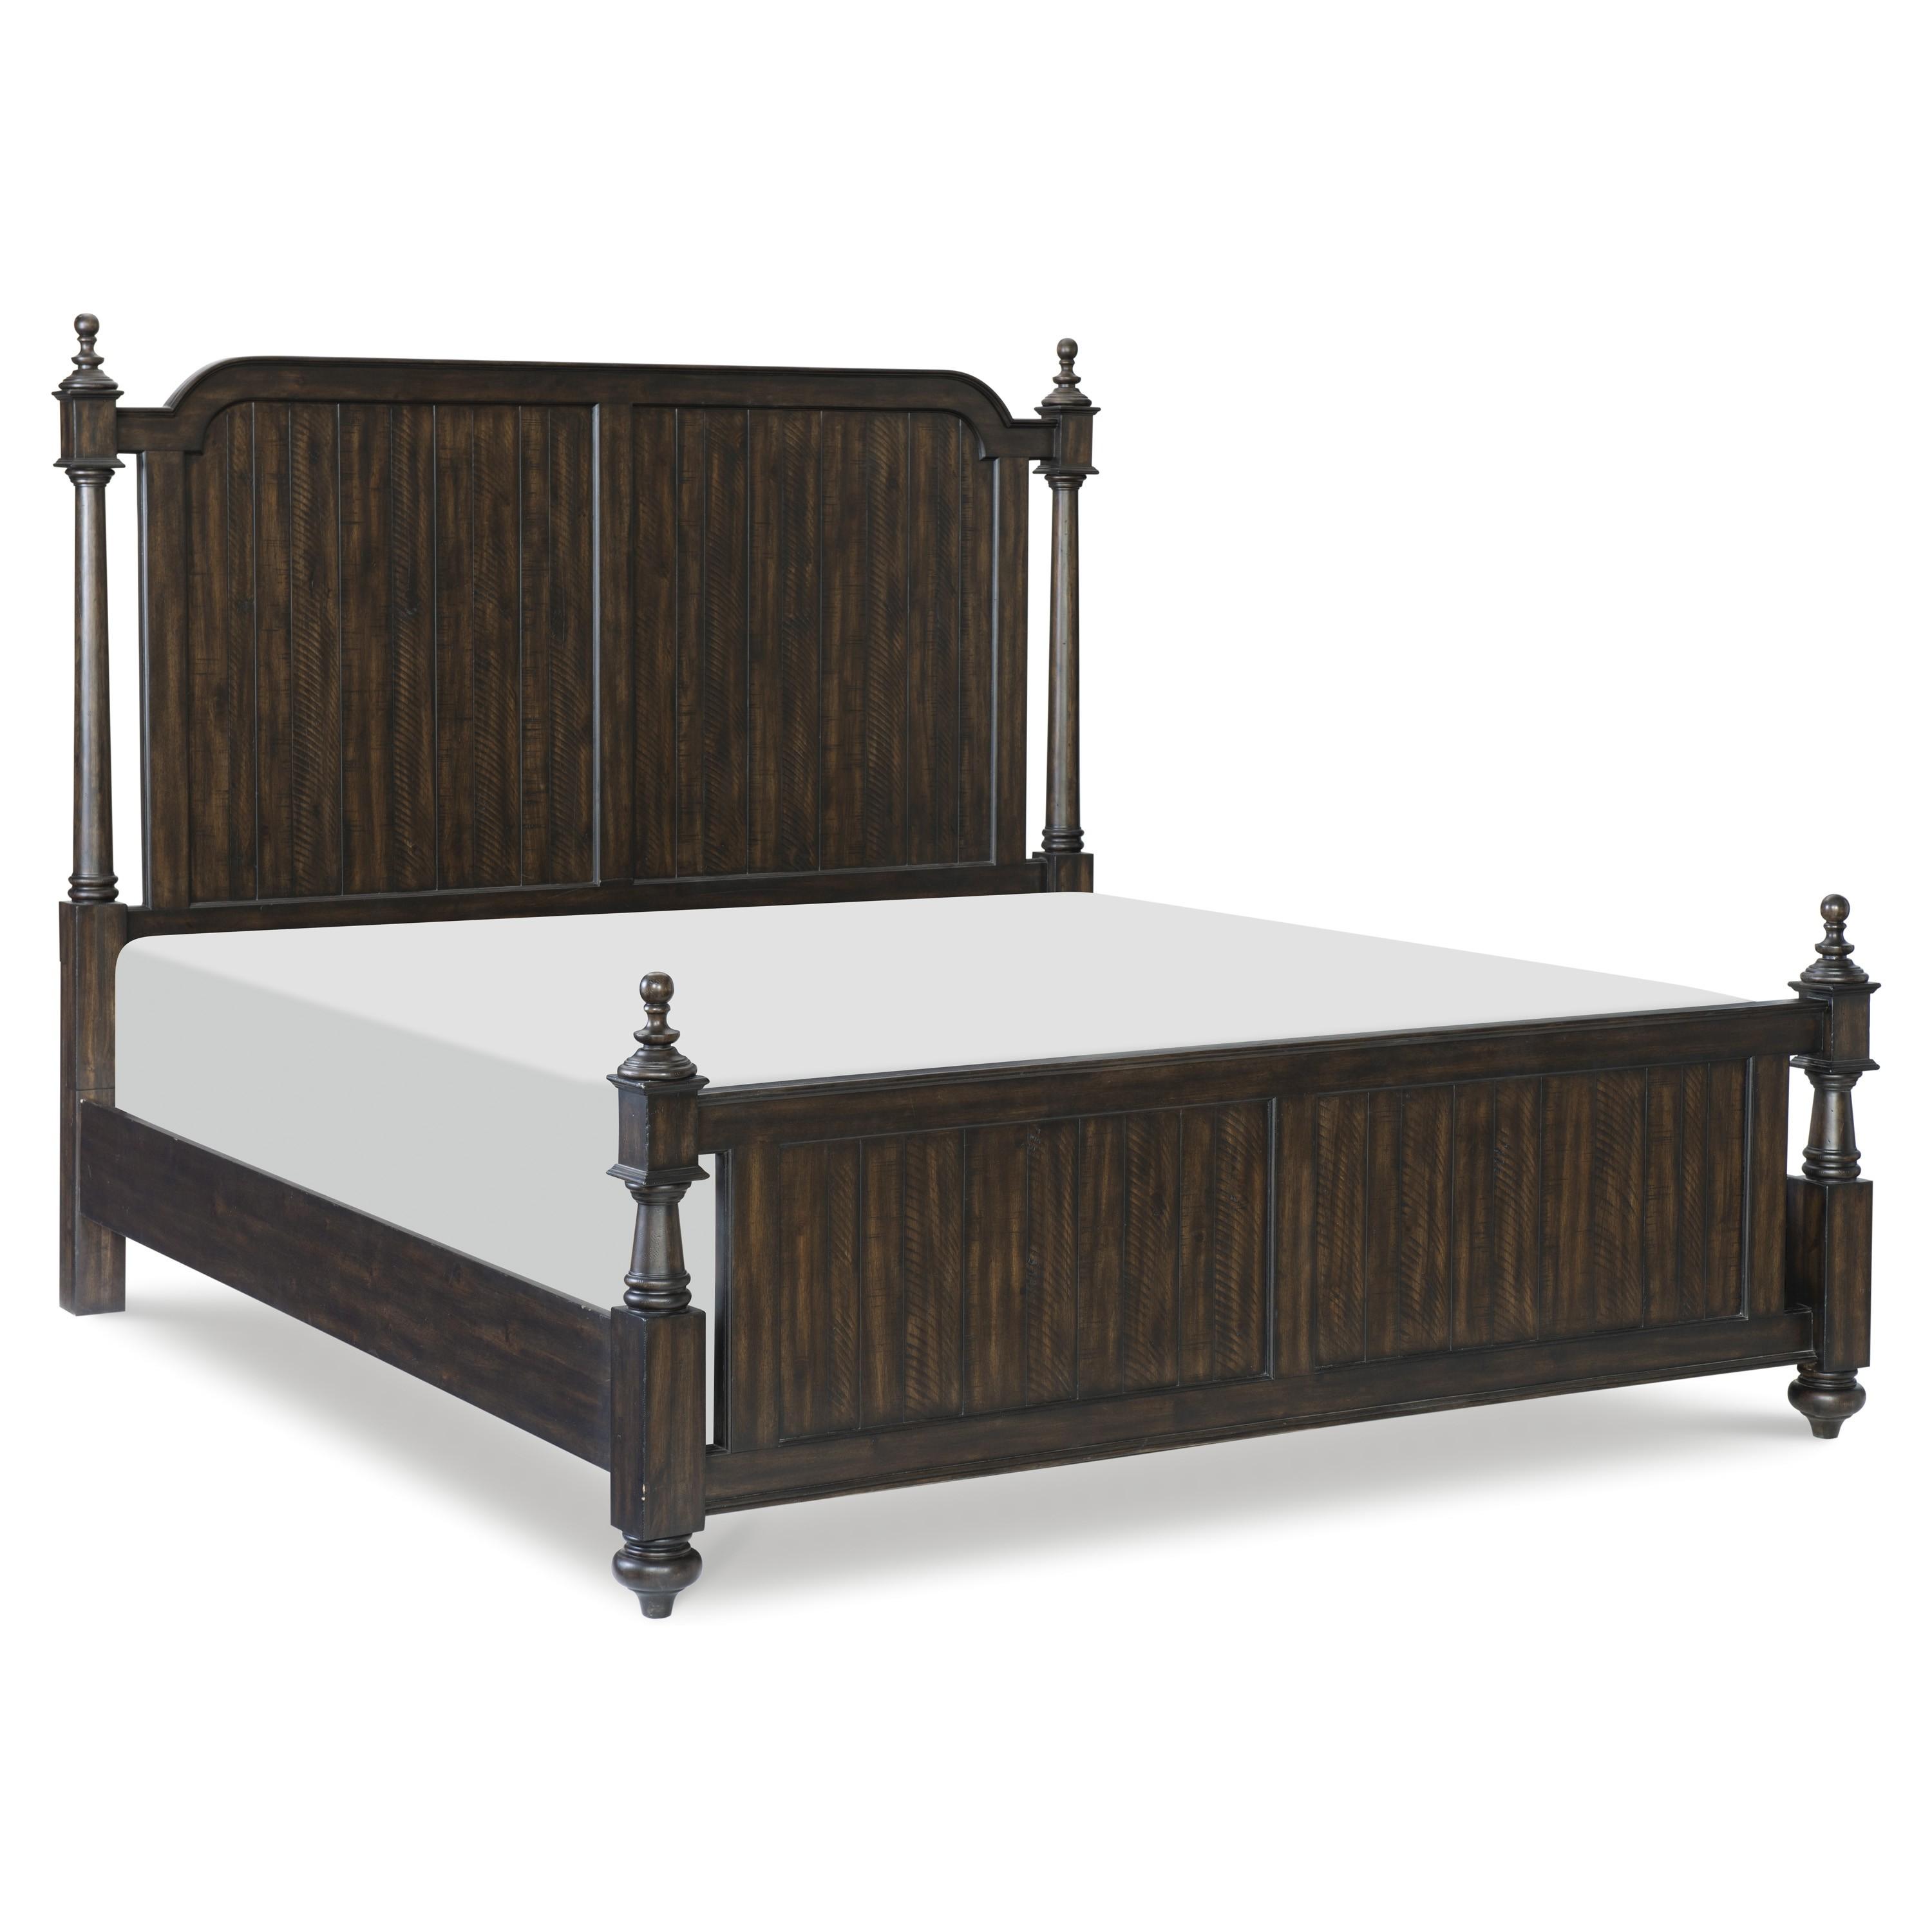 Transitional Bed 1689PK-1CK* Cardano 1689PK-1CK* in Charcoal 